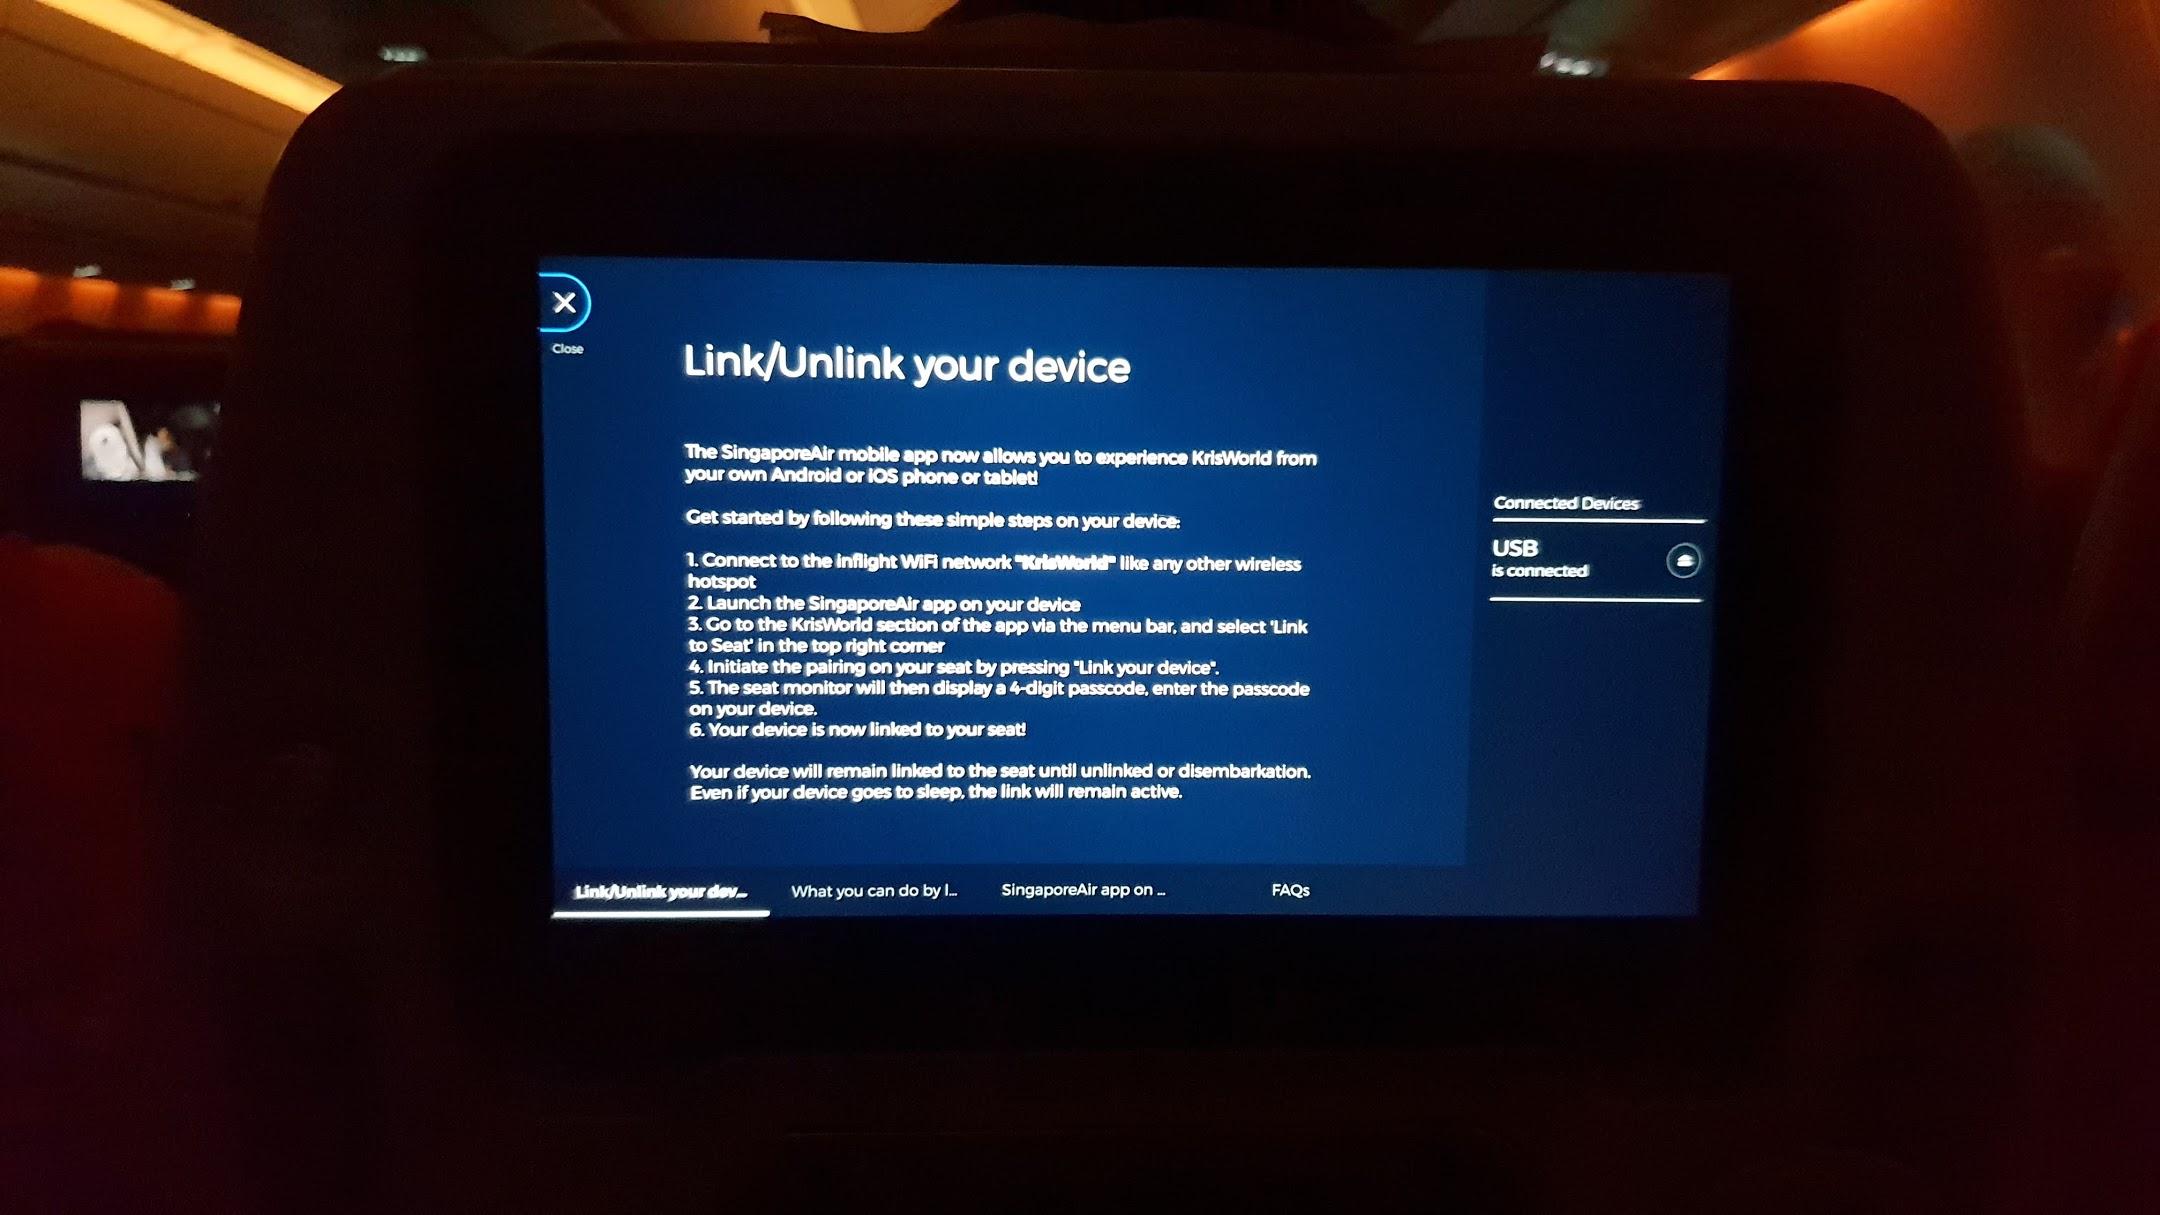 Singapore Airlines A350 Economy screen in-flight